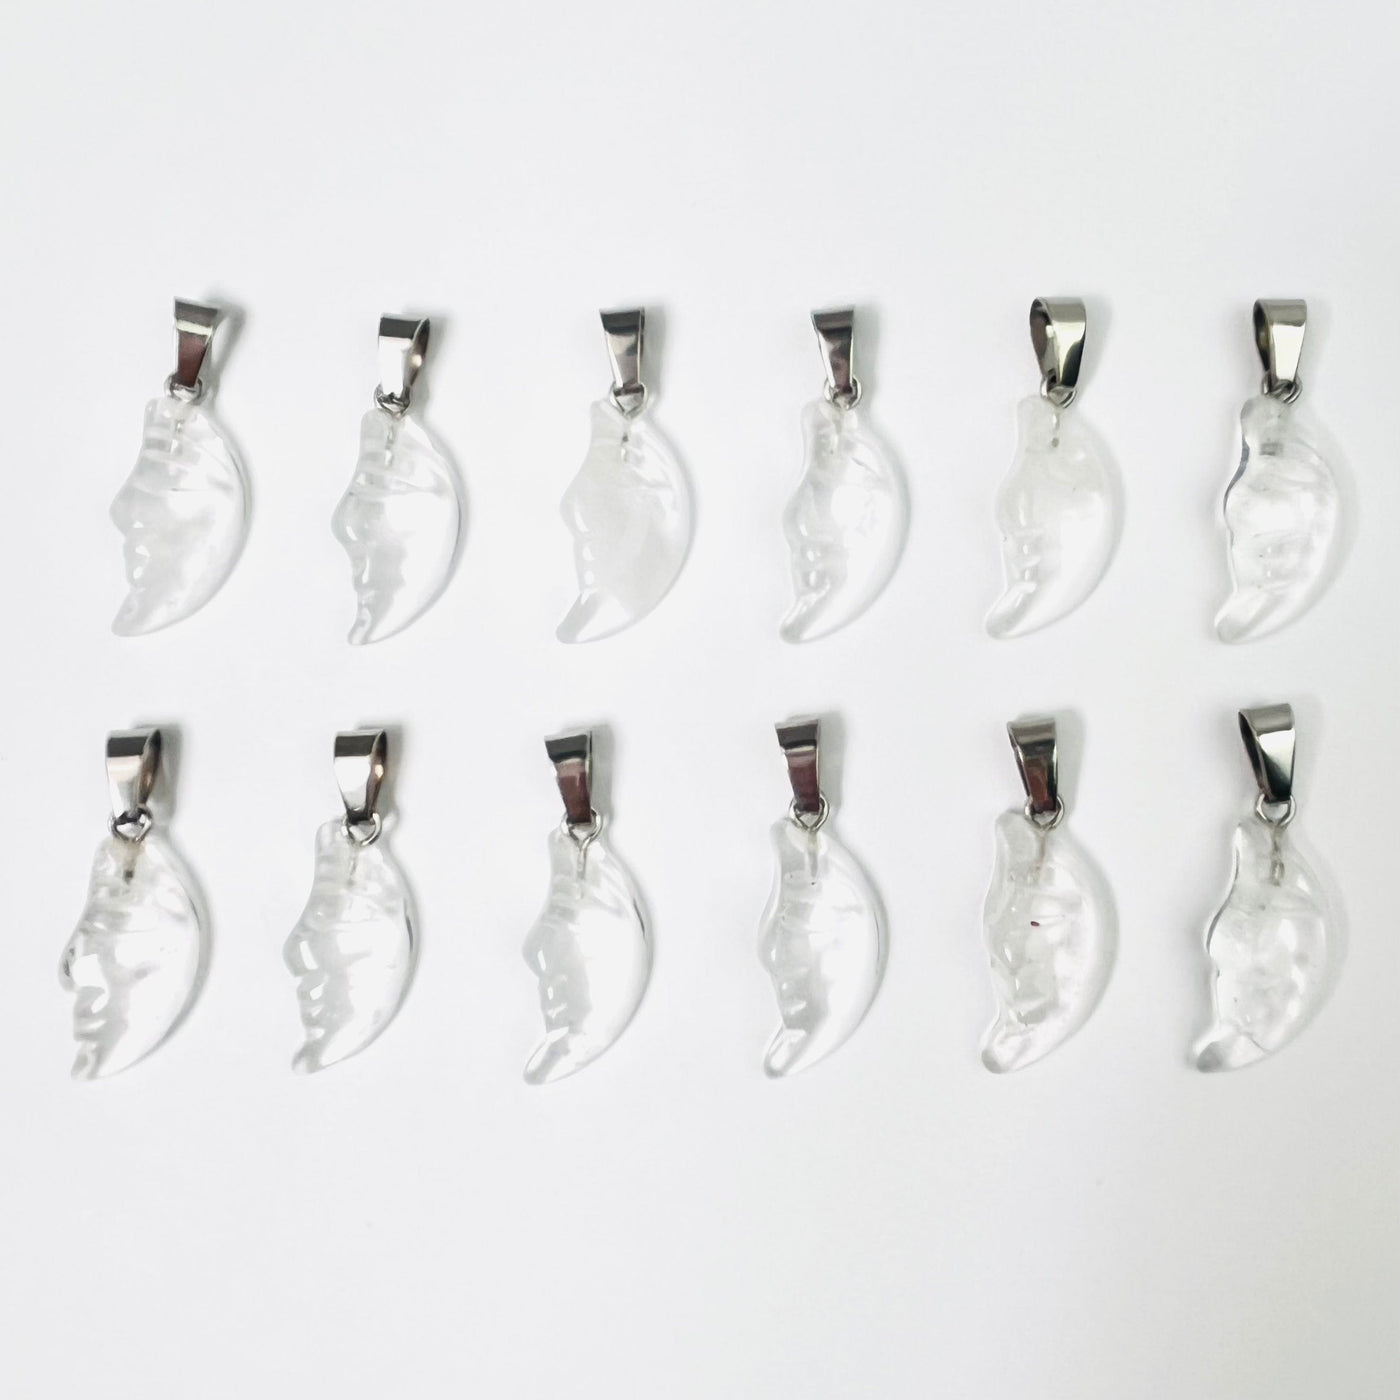 Twelve Crystal Quartz Crescent Moon Gemstones Pendants lined up in two rows on a white surface.